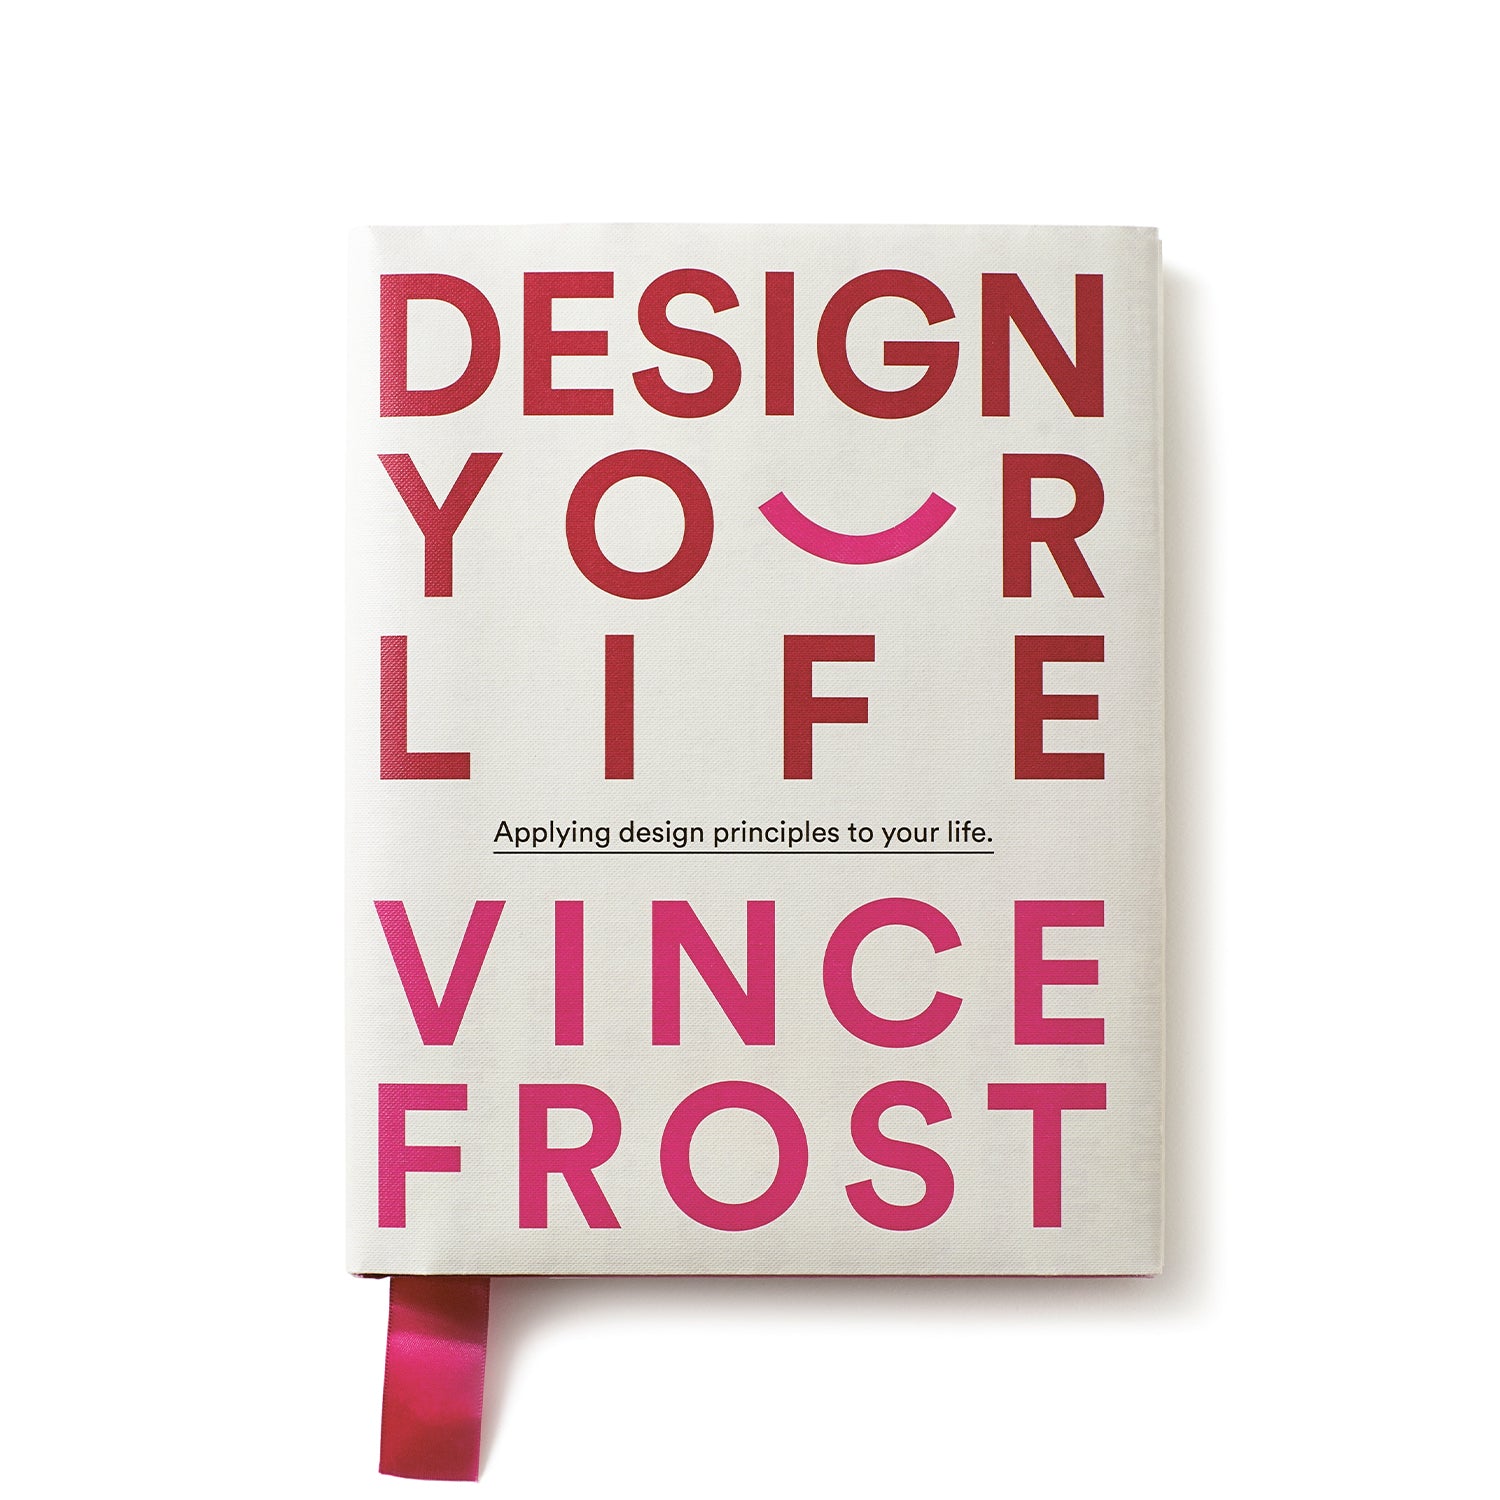 Design Your Life by Vince Frost*